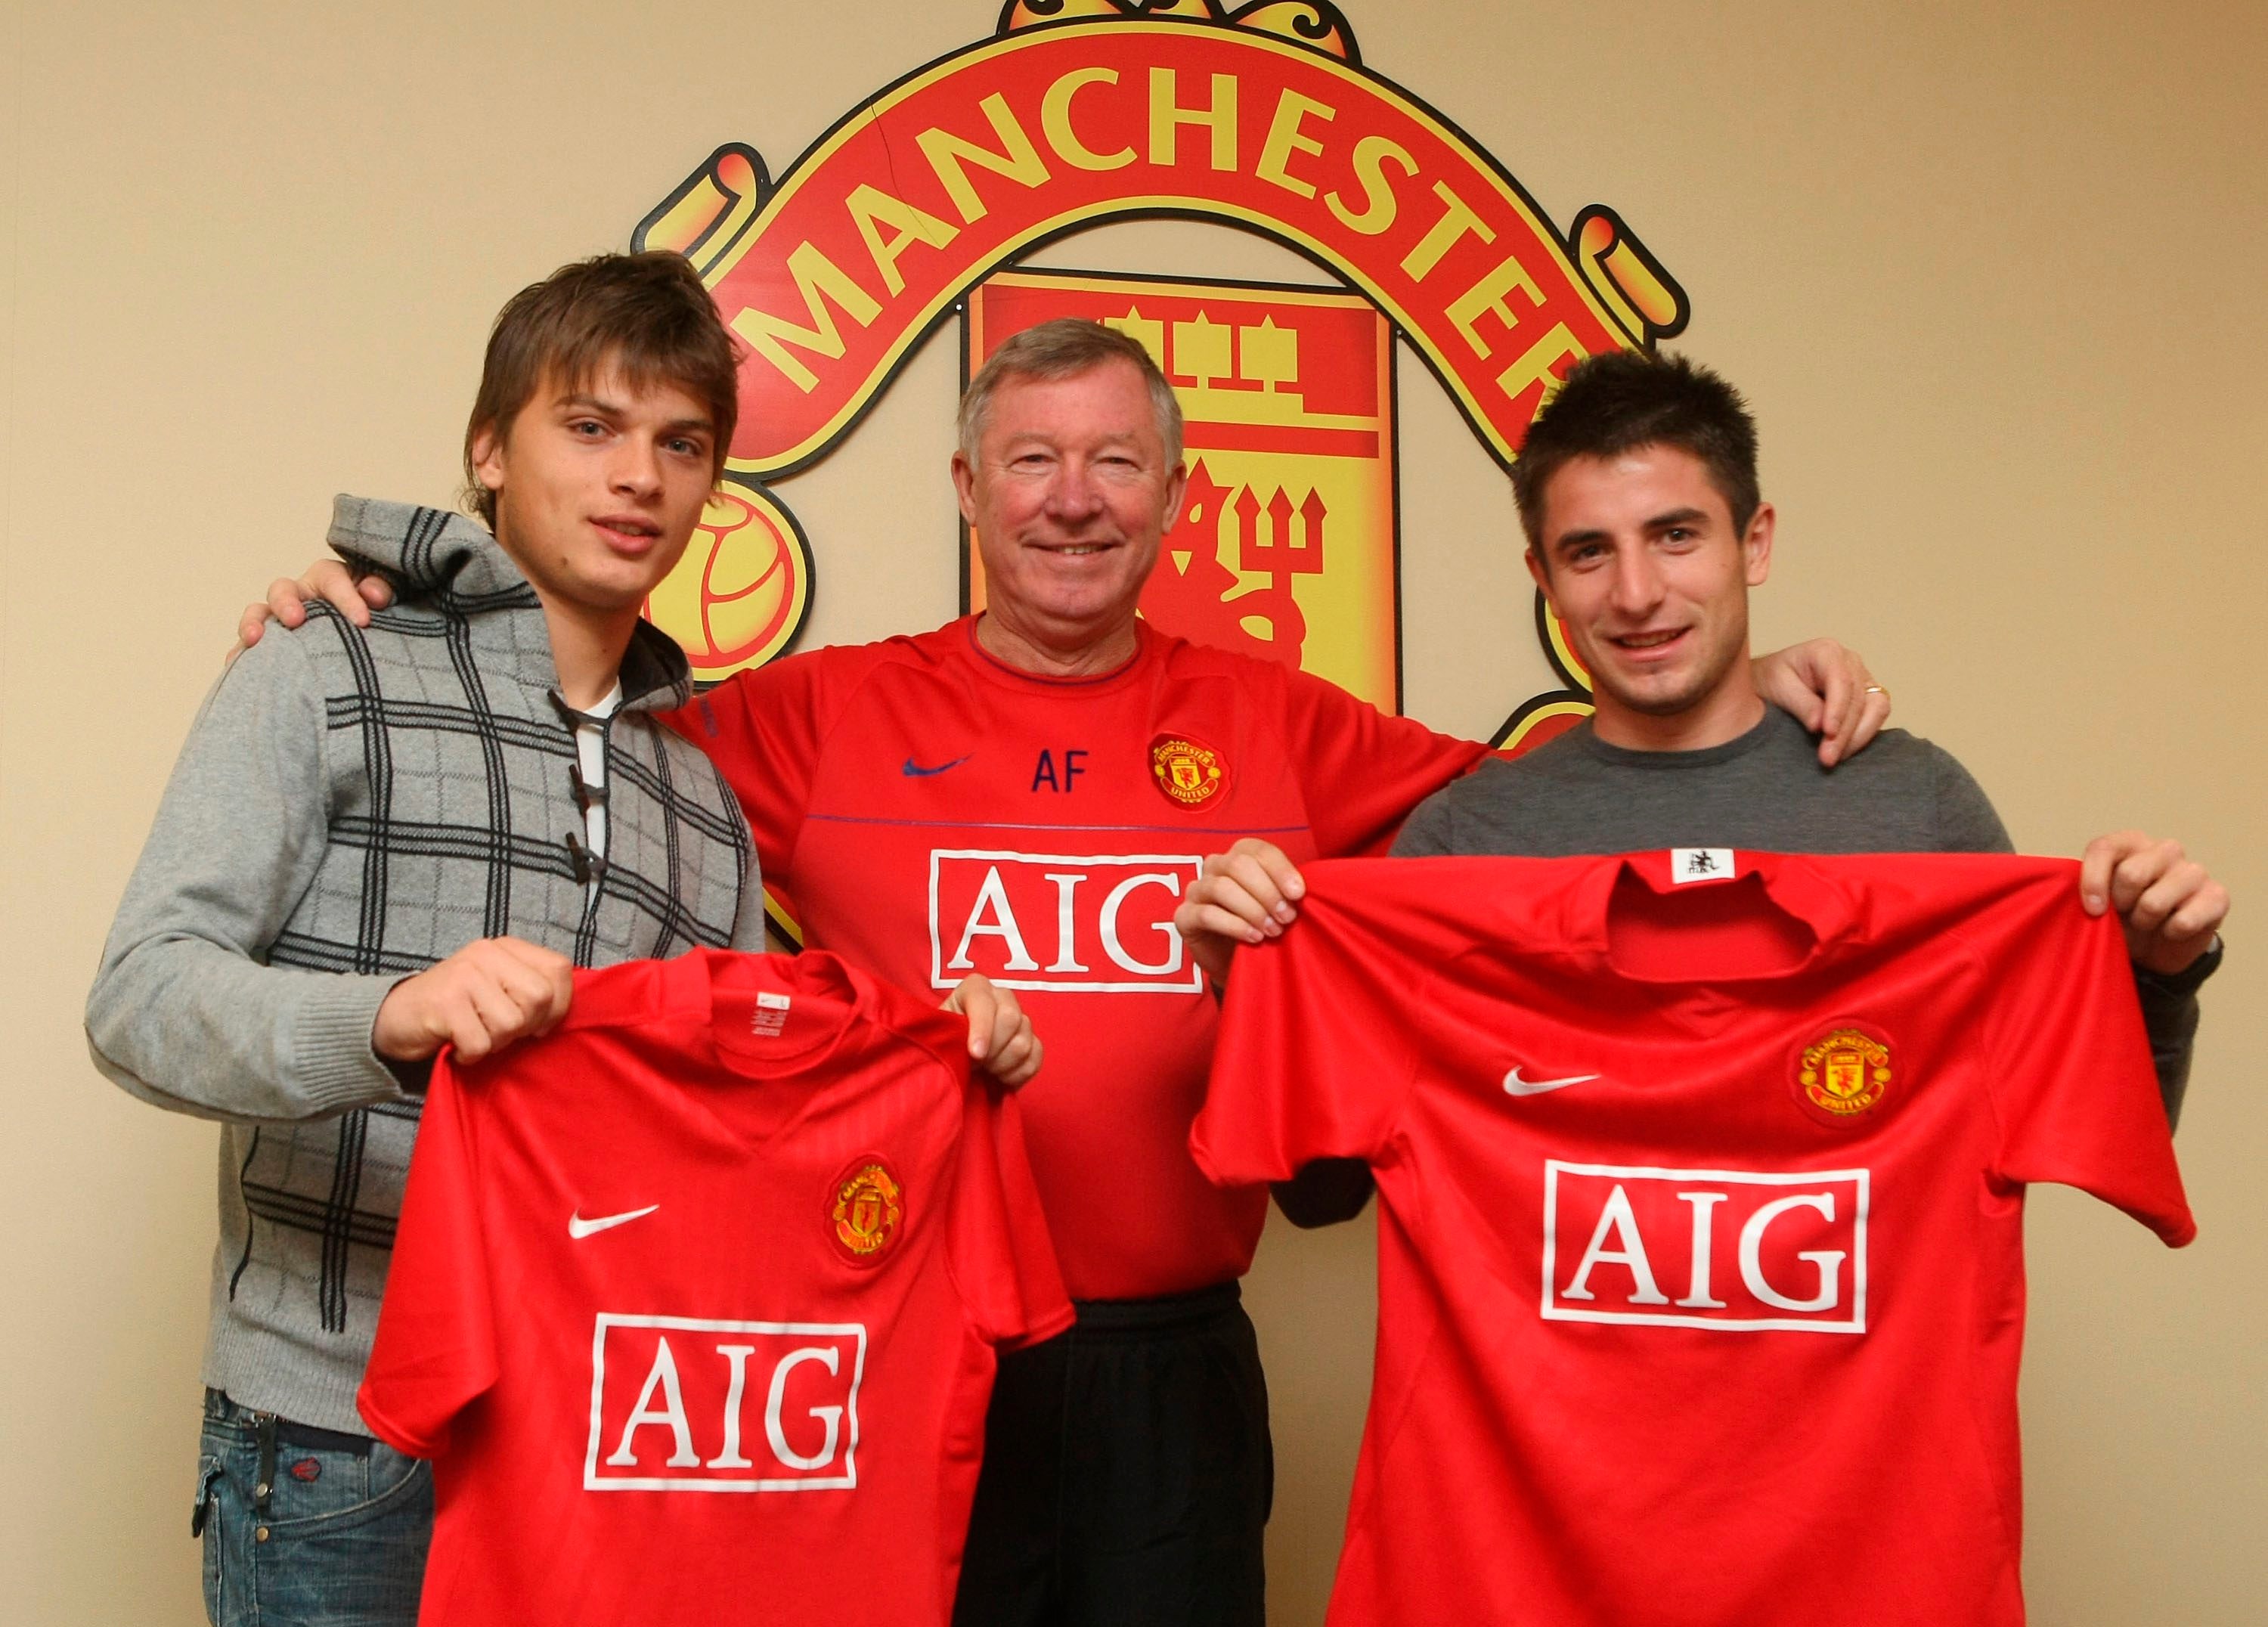 United pulled out of signing Ljajic but completed the signing of compatriot Zoran Tosic